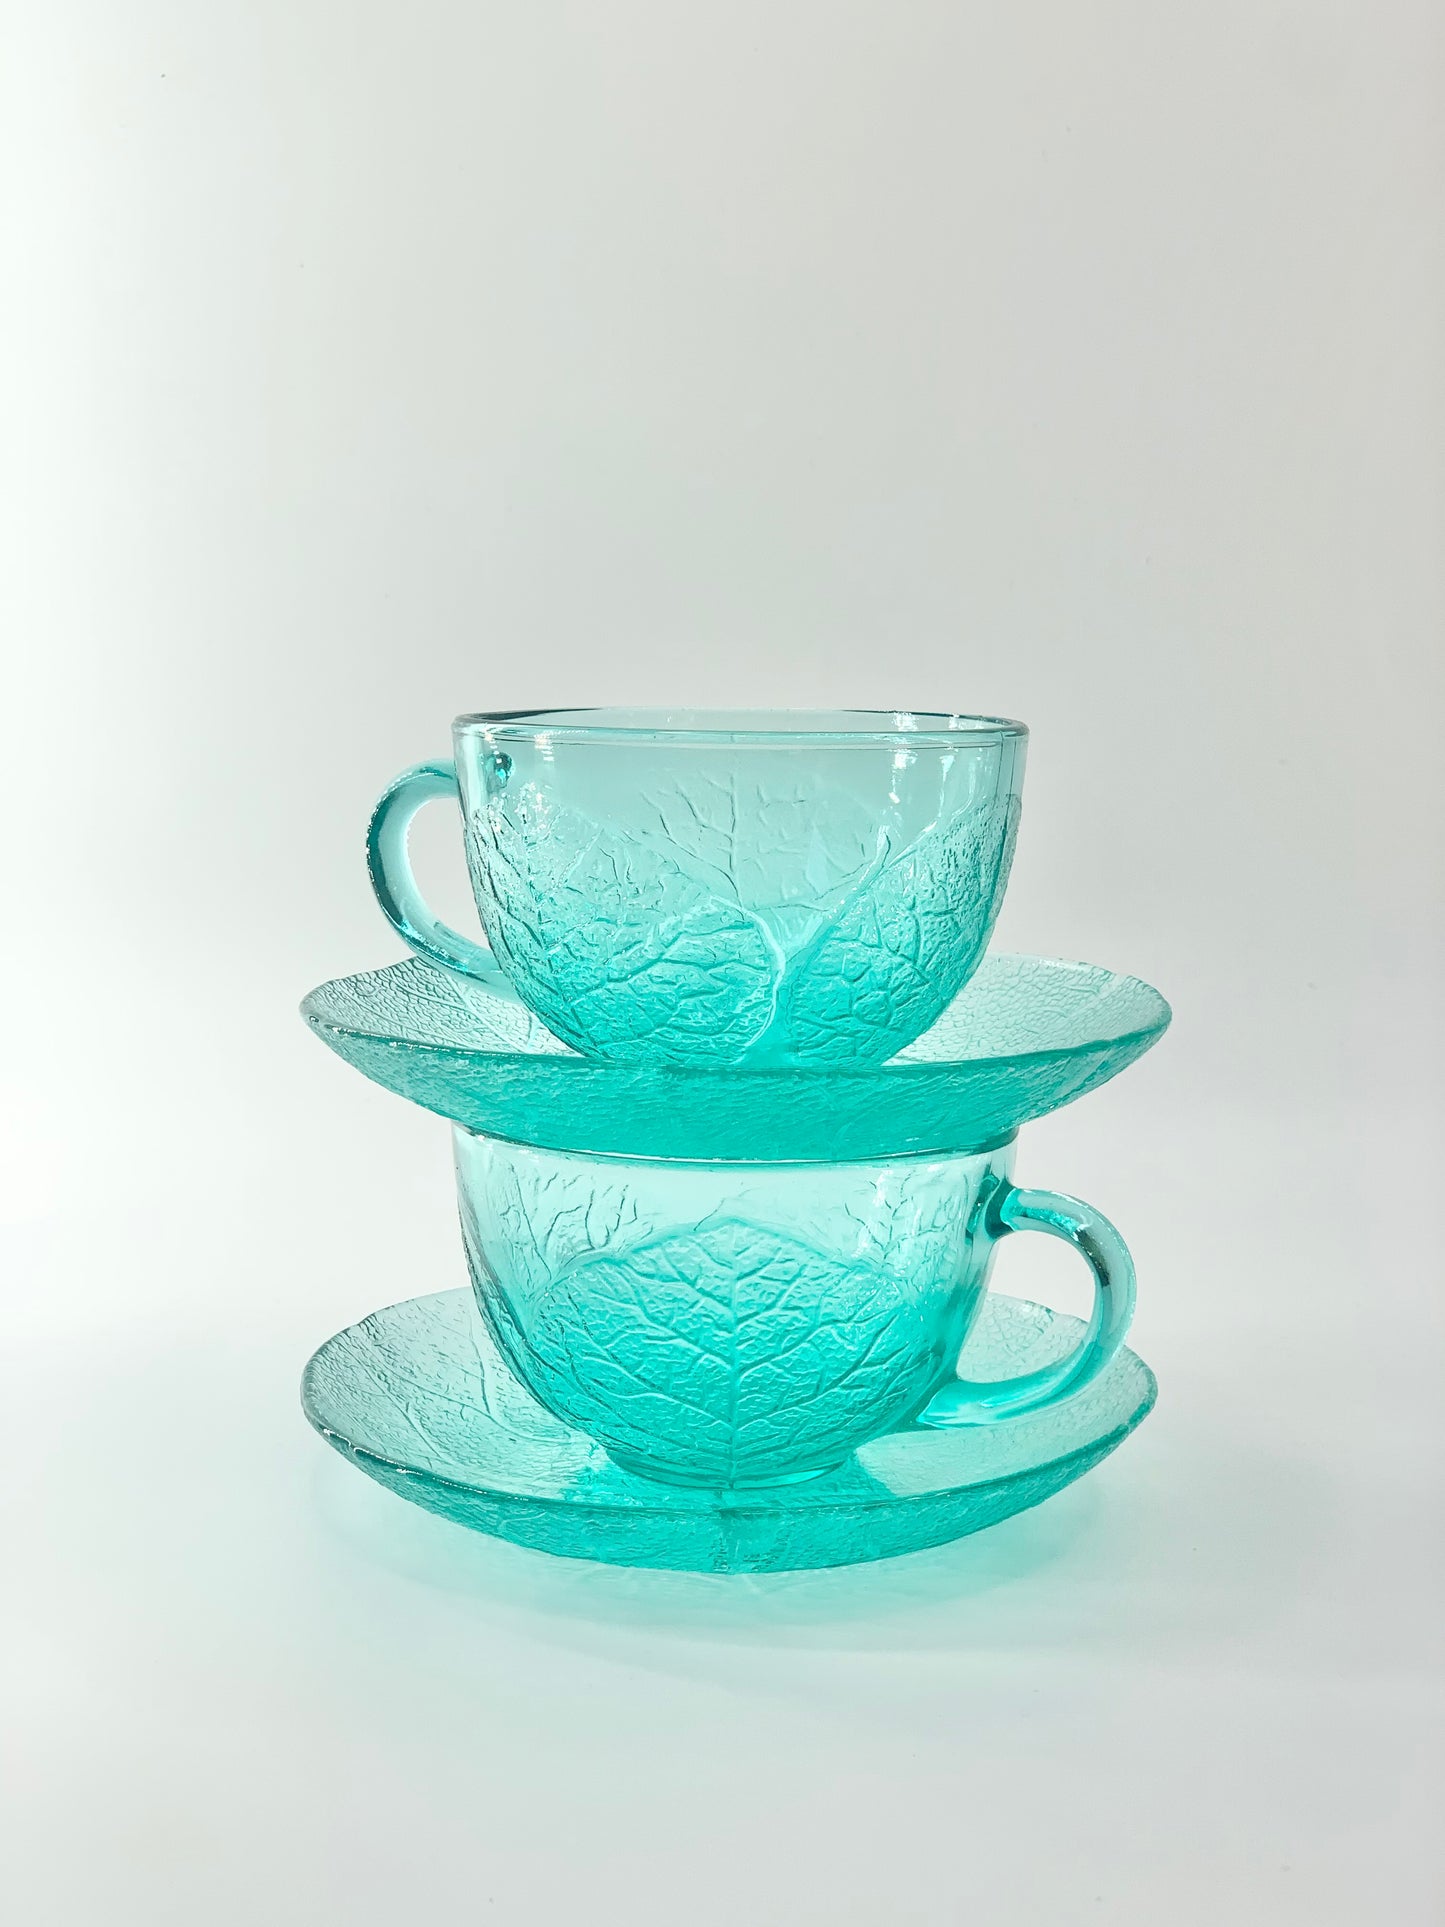 Retro textured leaf pattern teal glass Arcoroc tea cup and saucer